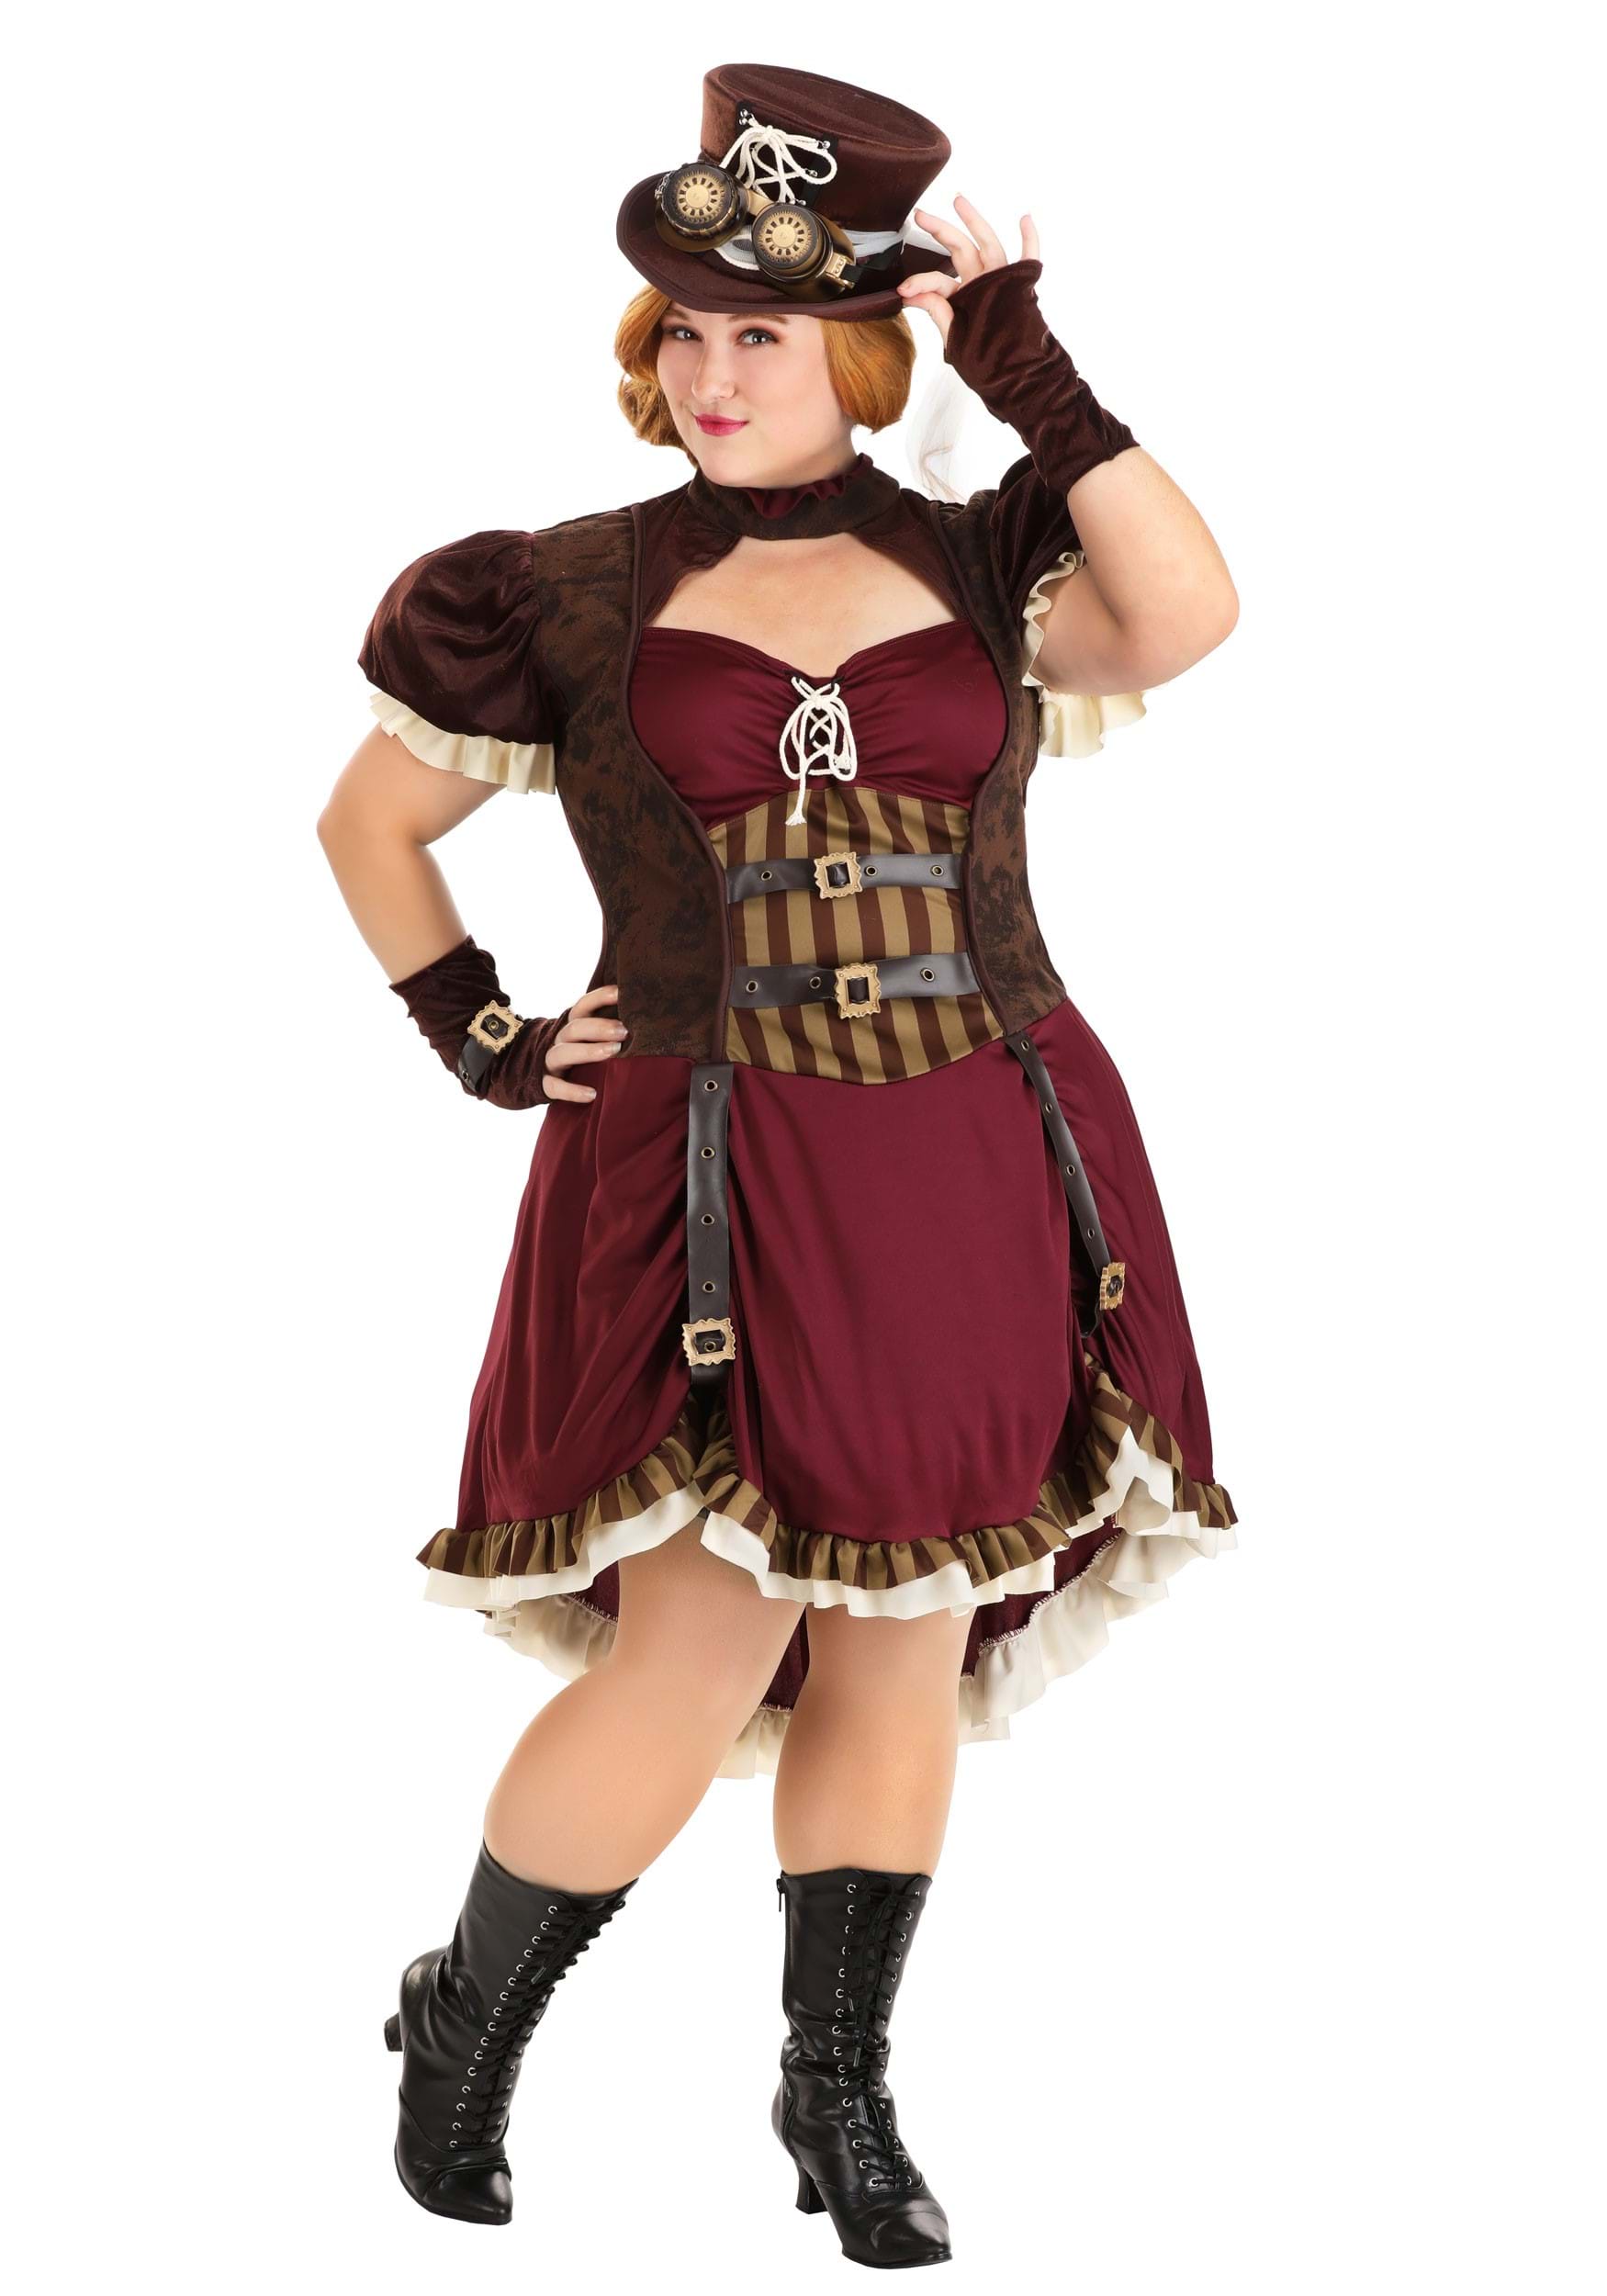 https://images.fun.com/products/28448/1-1/steampunk-lady-plus-size-costume.jpg